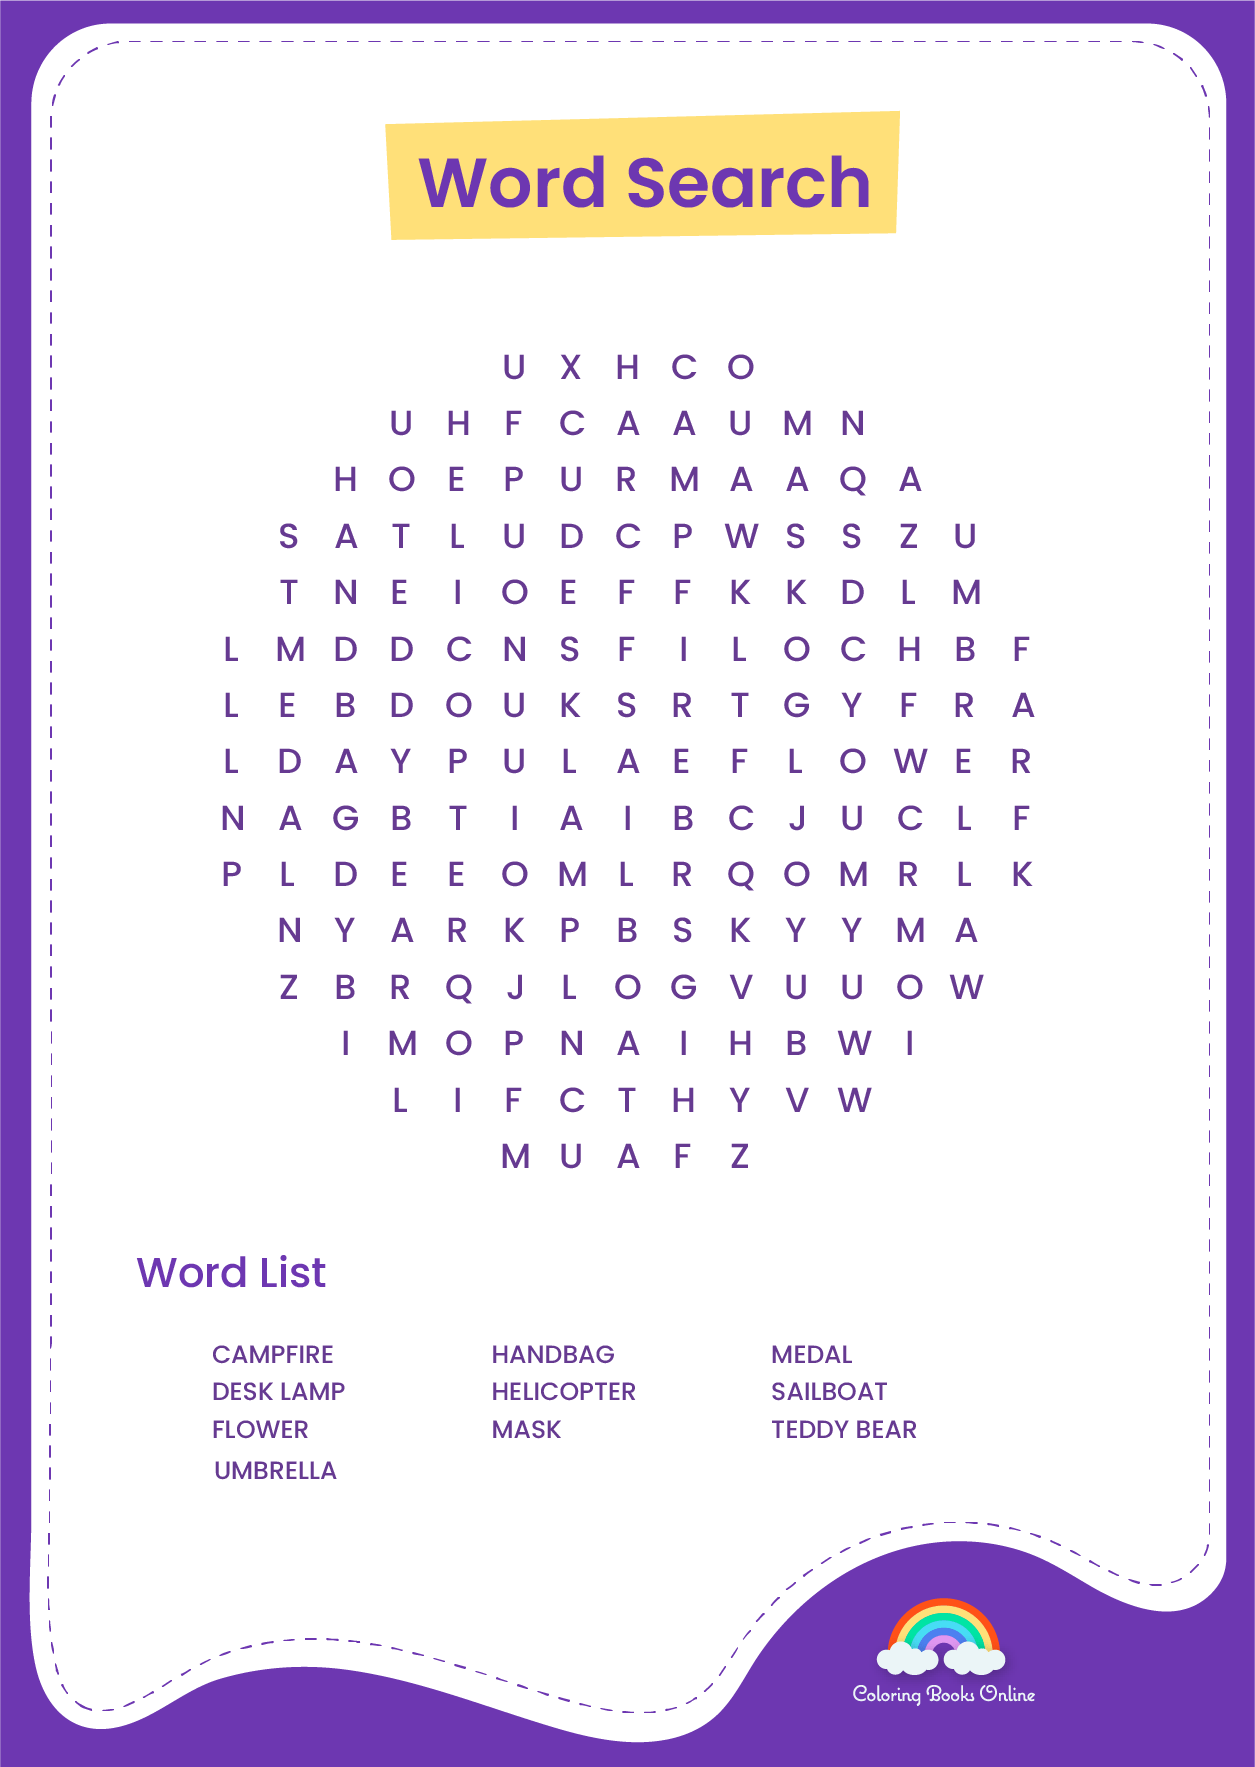 WORD-SEARCH